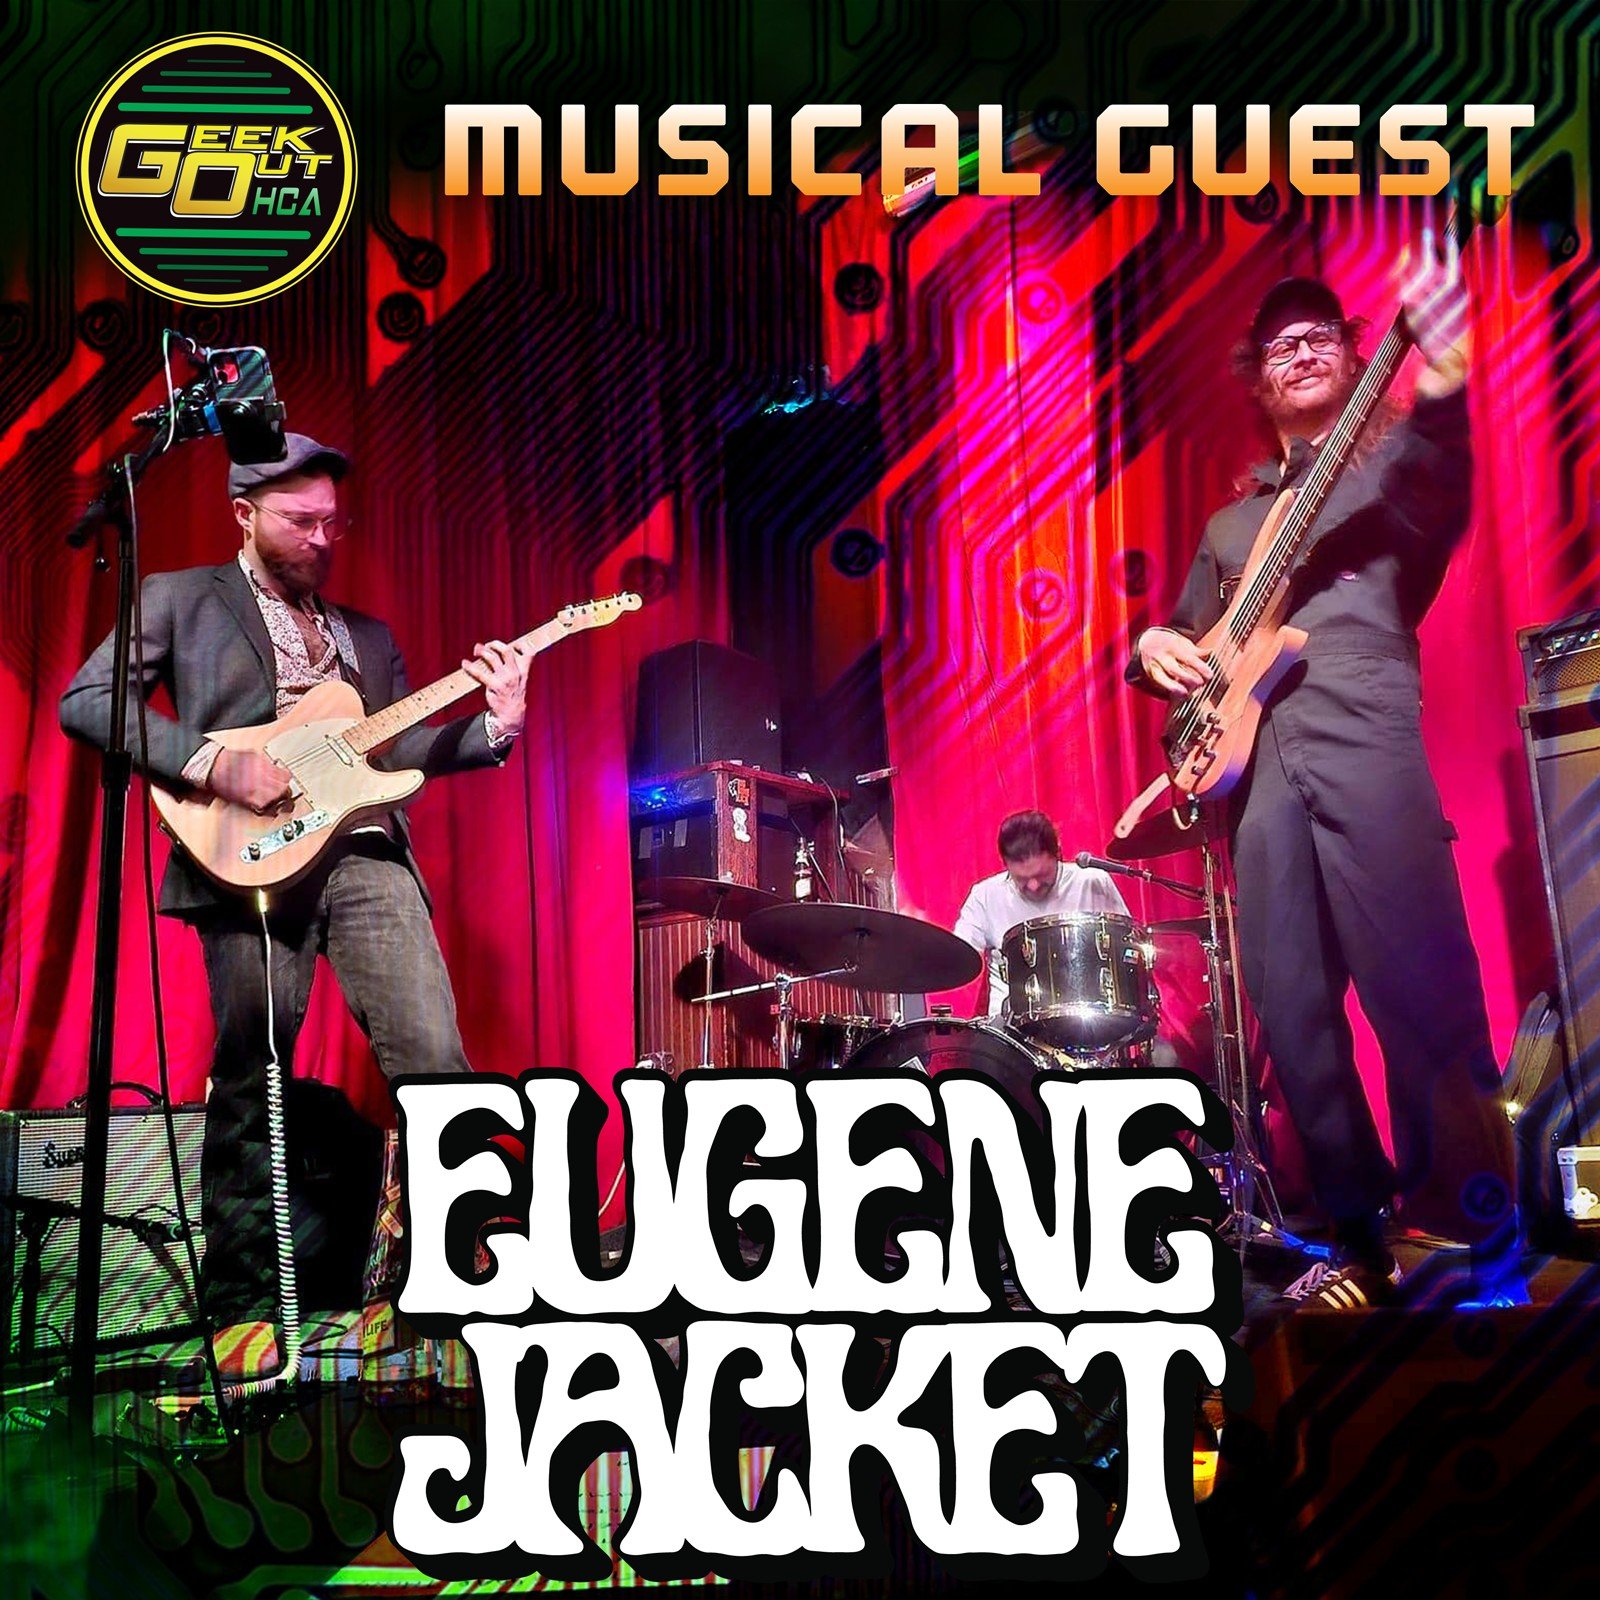   MUSICAL GUEST ANNOUNCEMENT  Eugene Jacket is joining us Saturday night to rock our faces off! Steven Hurley, Logan Powers and Josh Morrow comprise this high energy trio and will be a set you wont want to miss!  